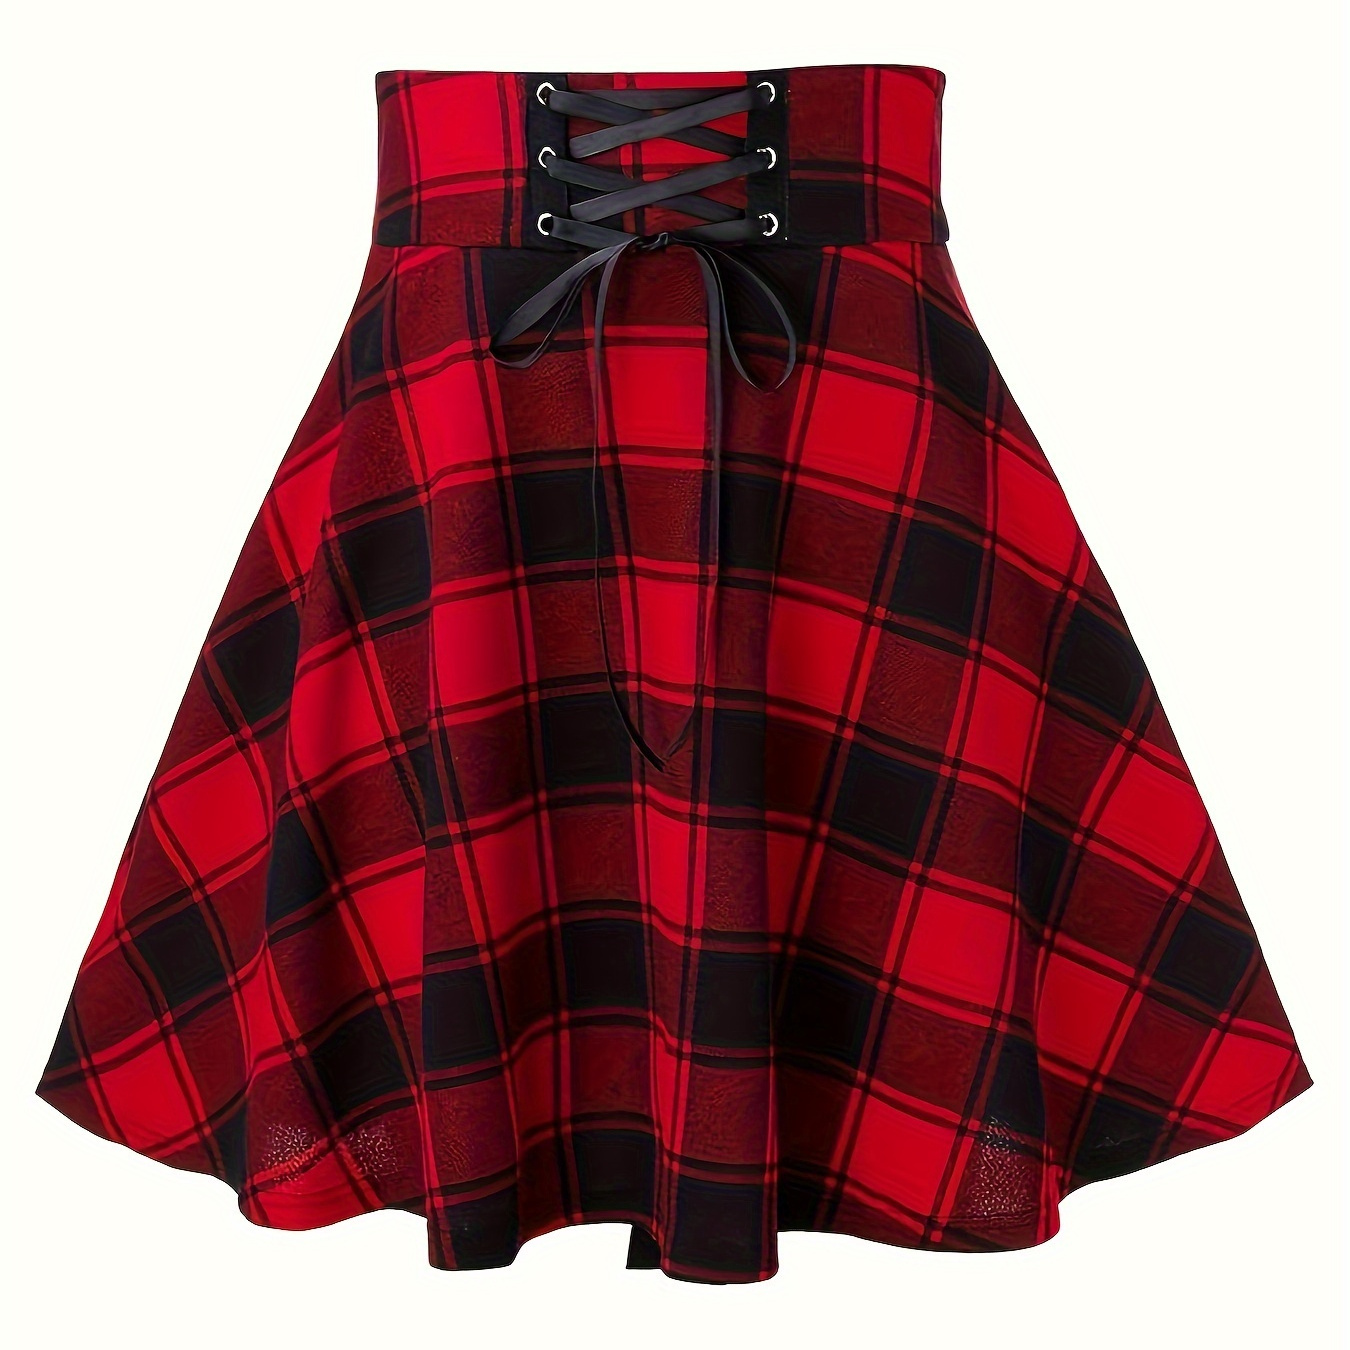 

Plaid Lace Up High Waist Skirt, Casual Flared Swing Mini Skirt, Women's Clothing